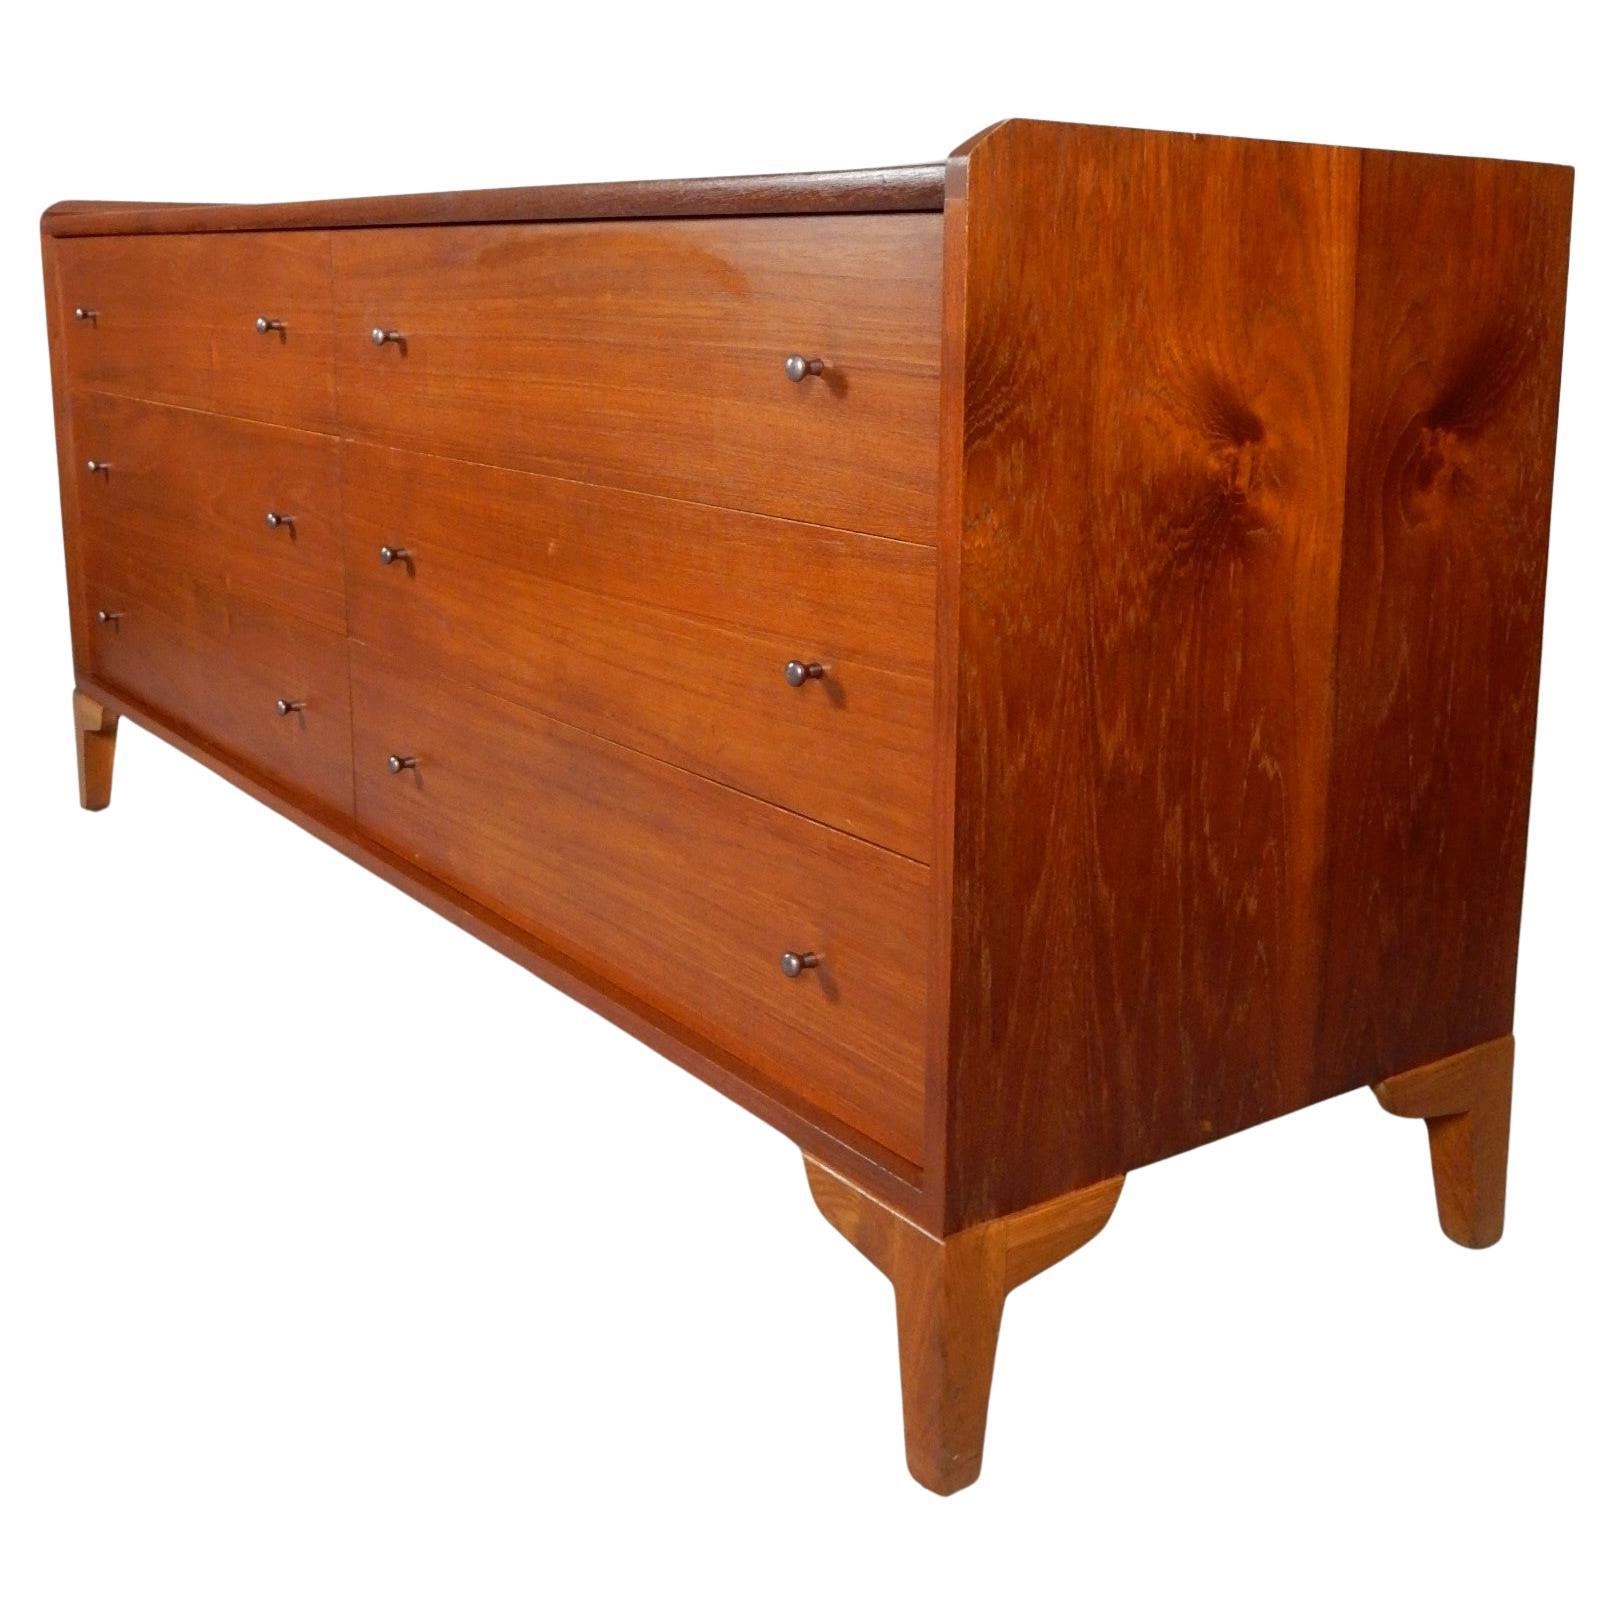 20th Century Mid Century Walnut Low Chest of Drawers by Charles Pechanec 1950's For Sale